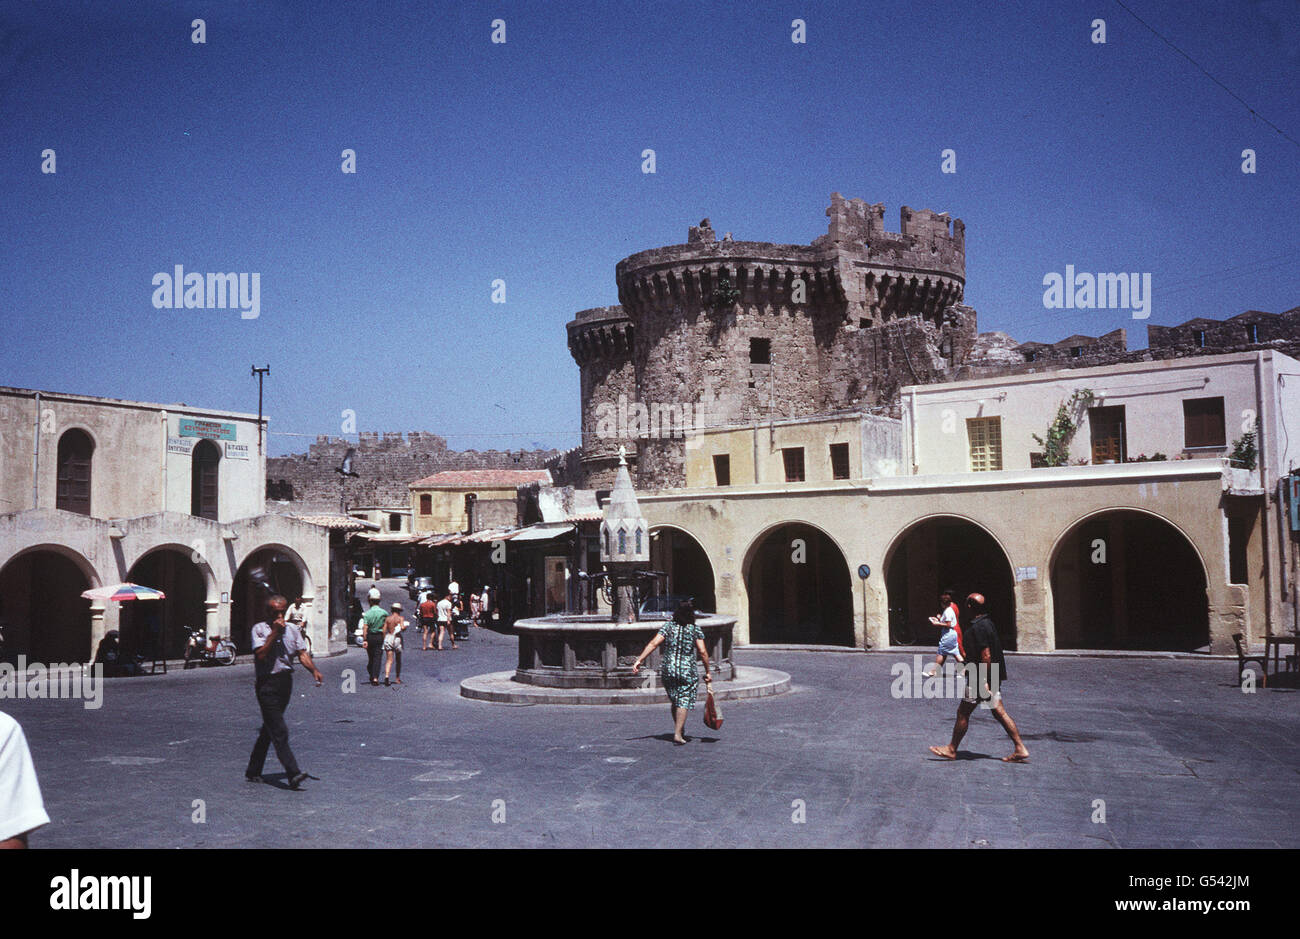 RHODES: Hippokrateous Square in the old city of Rhodes. In the background is marine gate of the fortifications built by the Knight Hospitallers (Order of St. John). Rhodes was the main base for the Order before the knights' expulsion by the Turkish Sultan Suleiman the Magnificent in 1522. Stock Photo